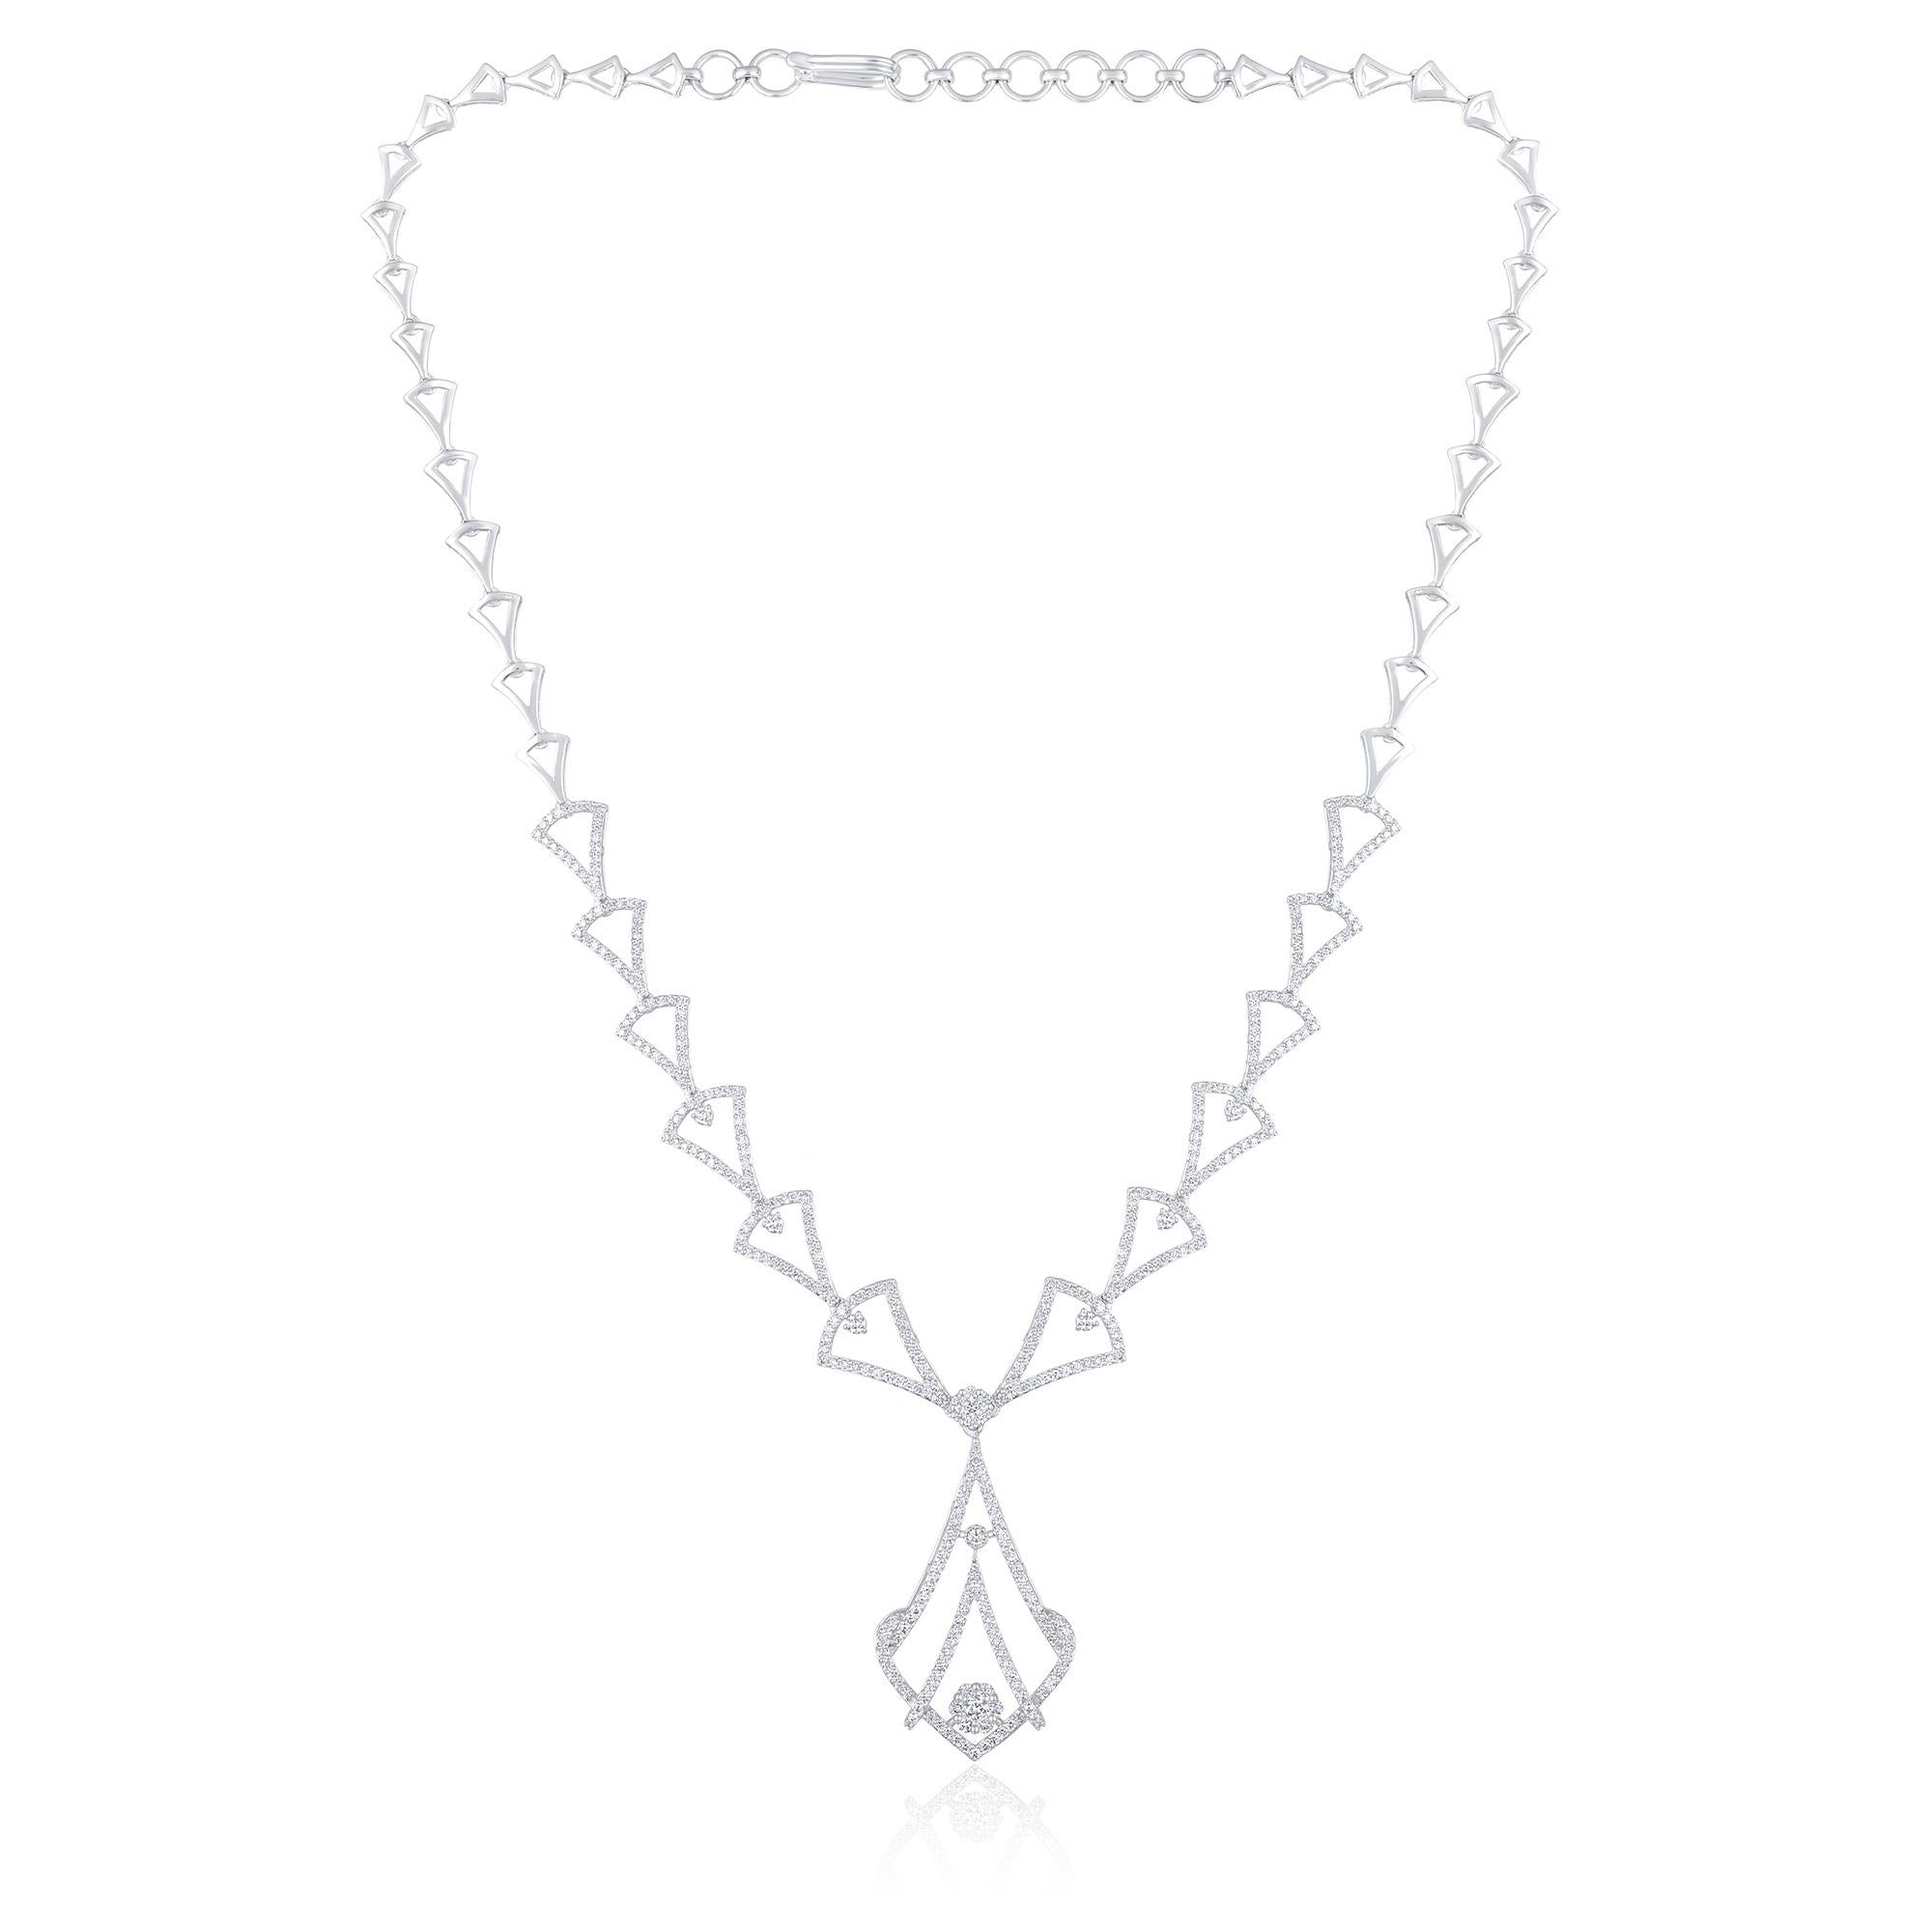 Crafted in 20.36 grams of 14-karat White Gold, contains 522 Stones of Round Diamonds with a total of 2.69-Carats in G-H Color and VS Clarity. The Necklace is 18-inch in Length.

CONTEMPORARY AND TIMELESS ESSENCE: Crafted in 14-karat/18-karat with